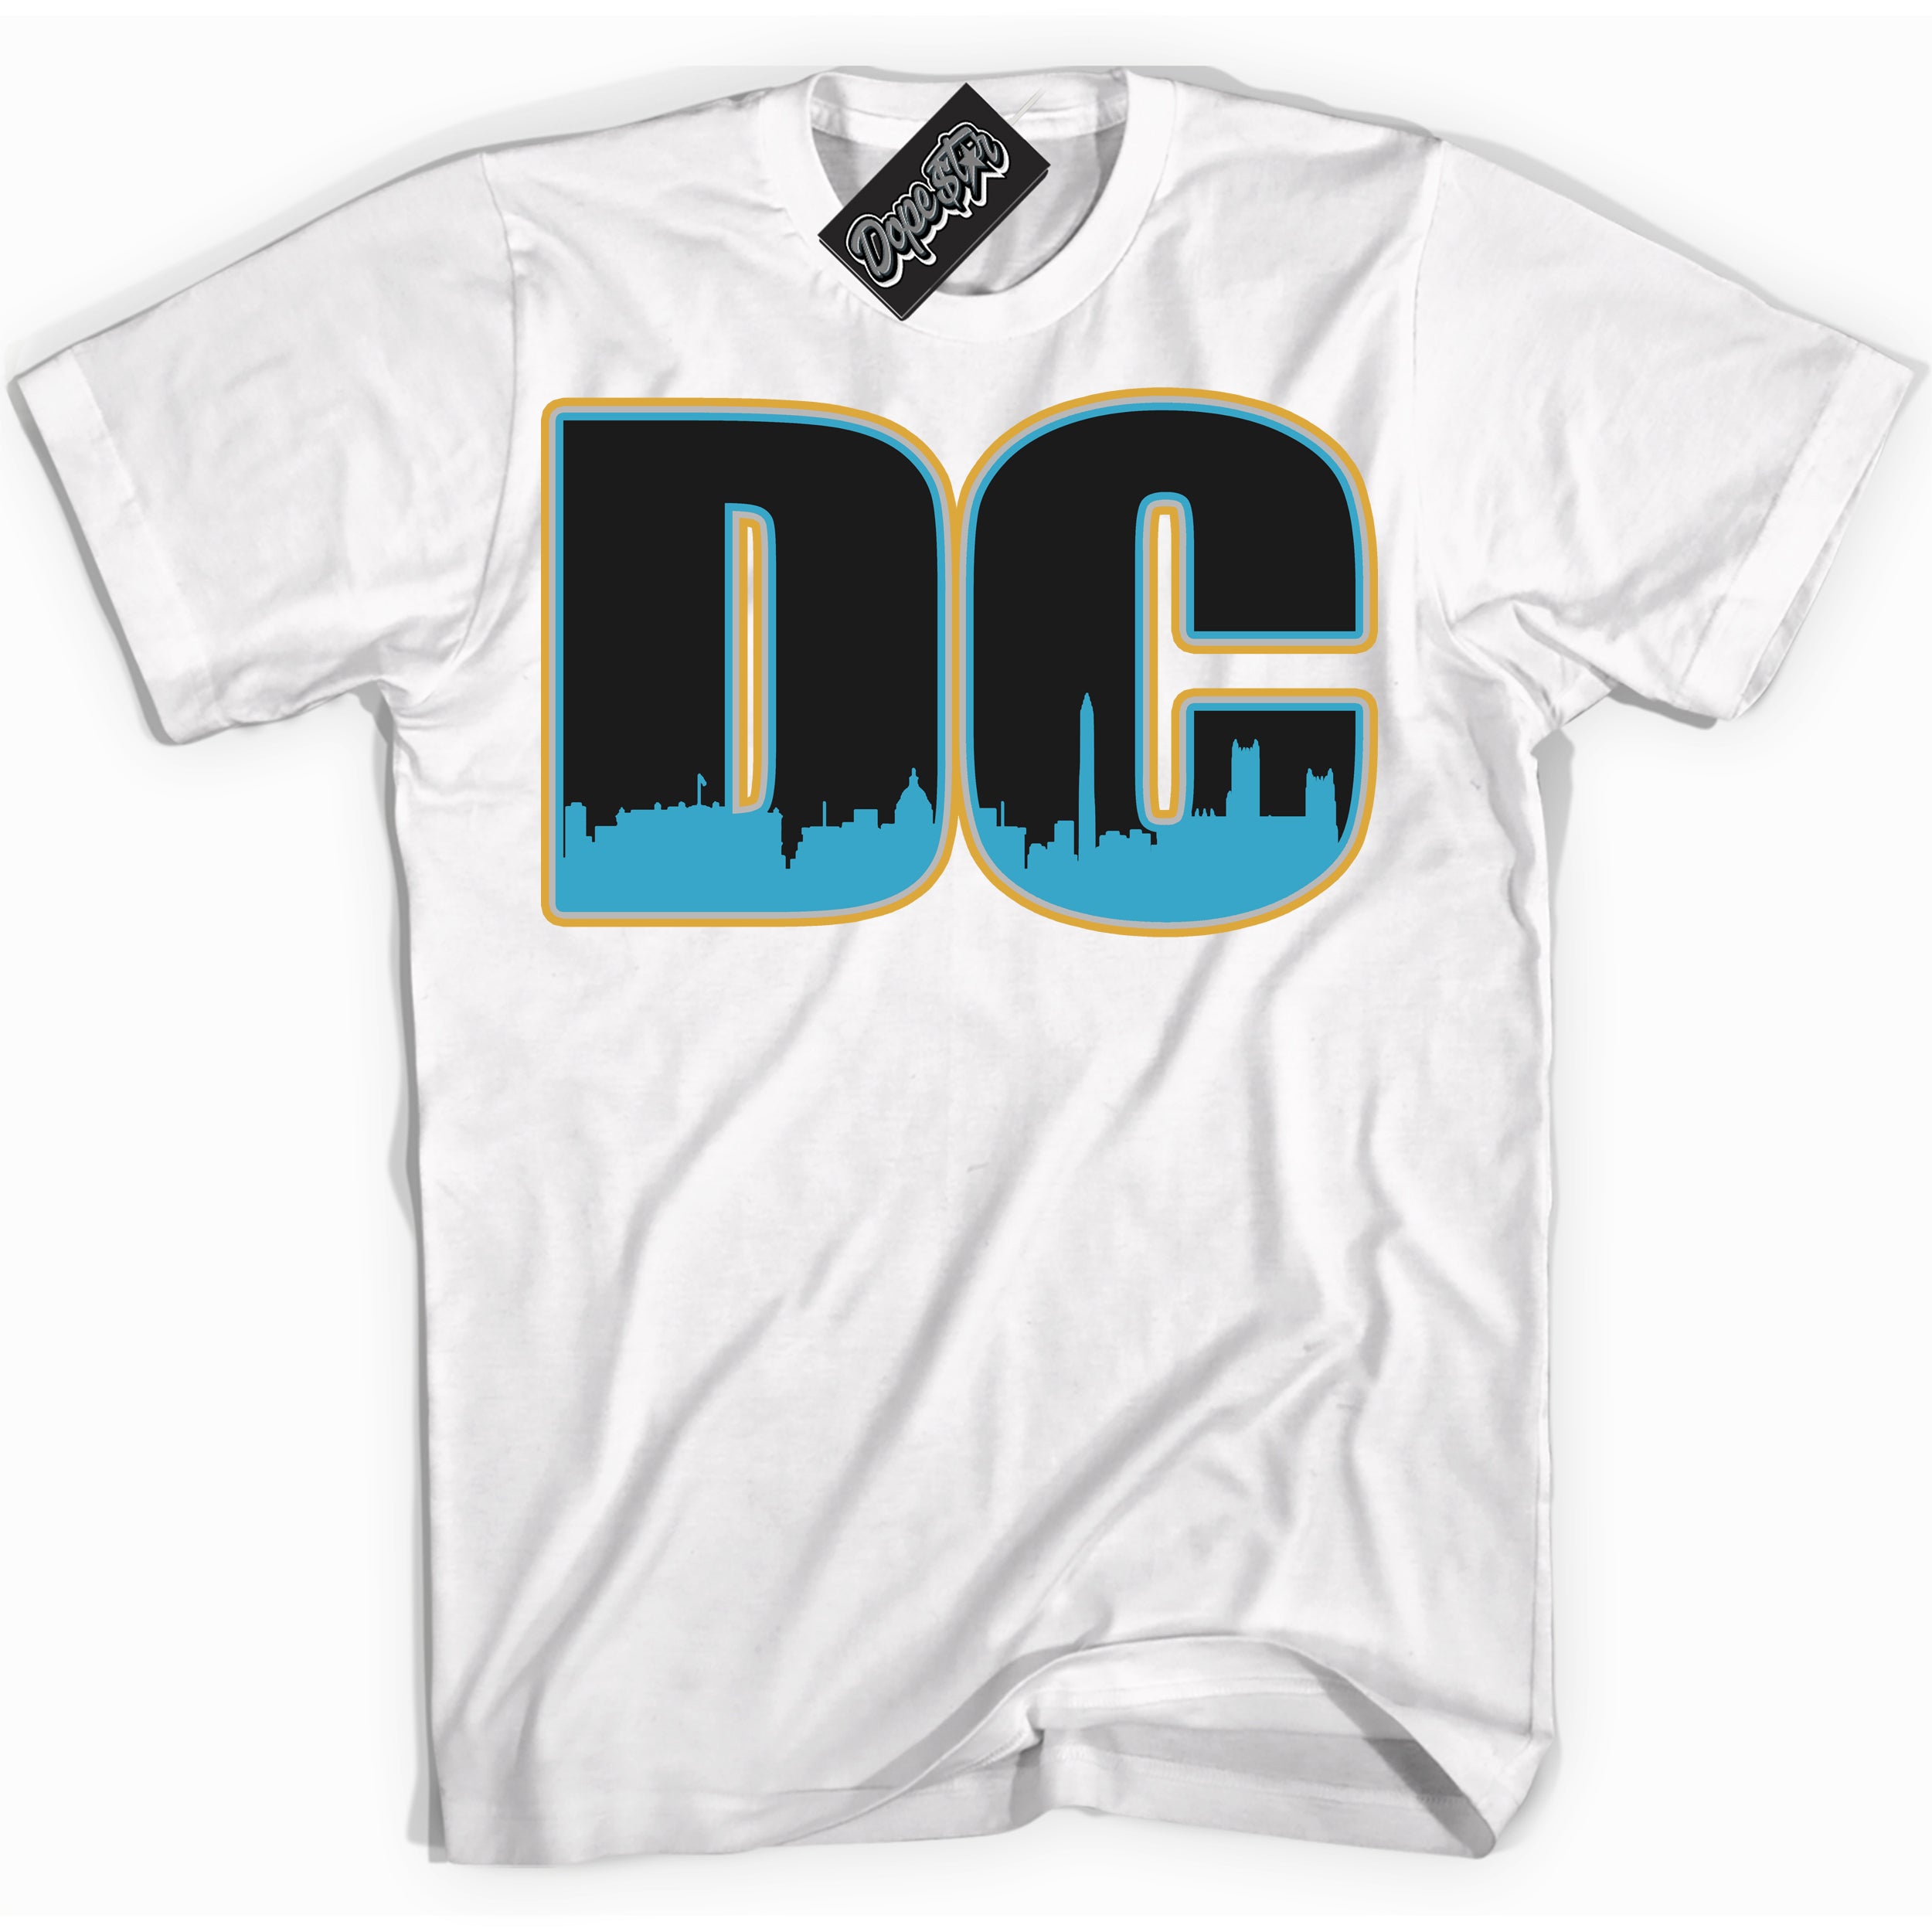 Cool White Shirt with “ DC” design that perfectly matches Aqua 5s Sneakers.